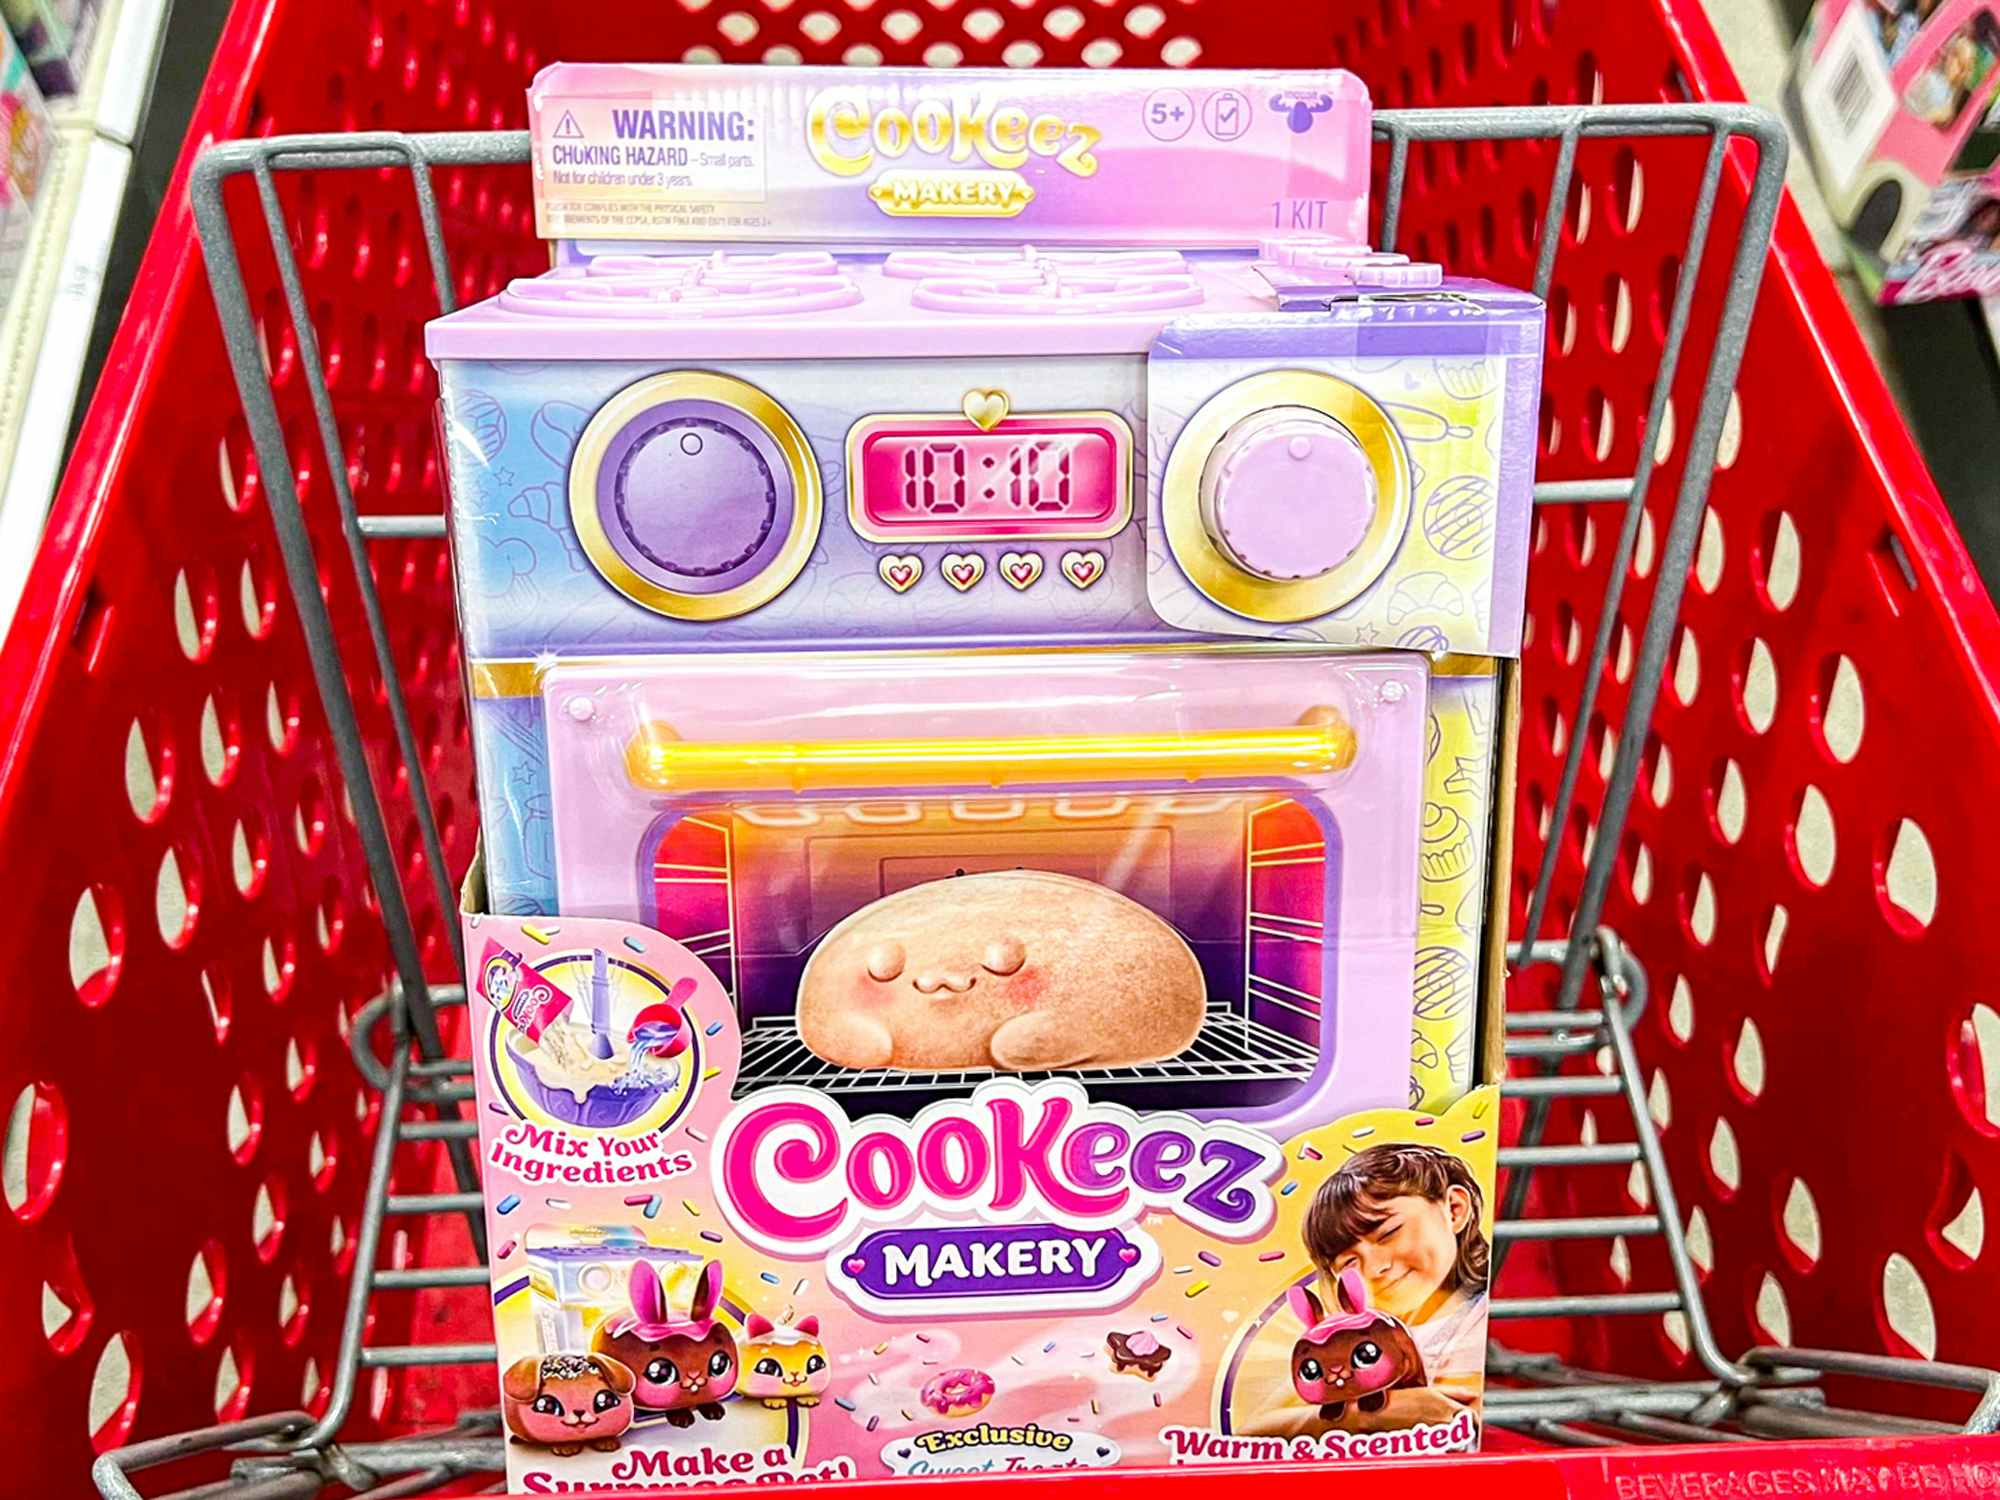 a cookeez makery in target cart